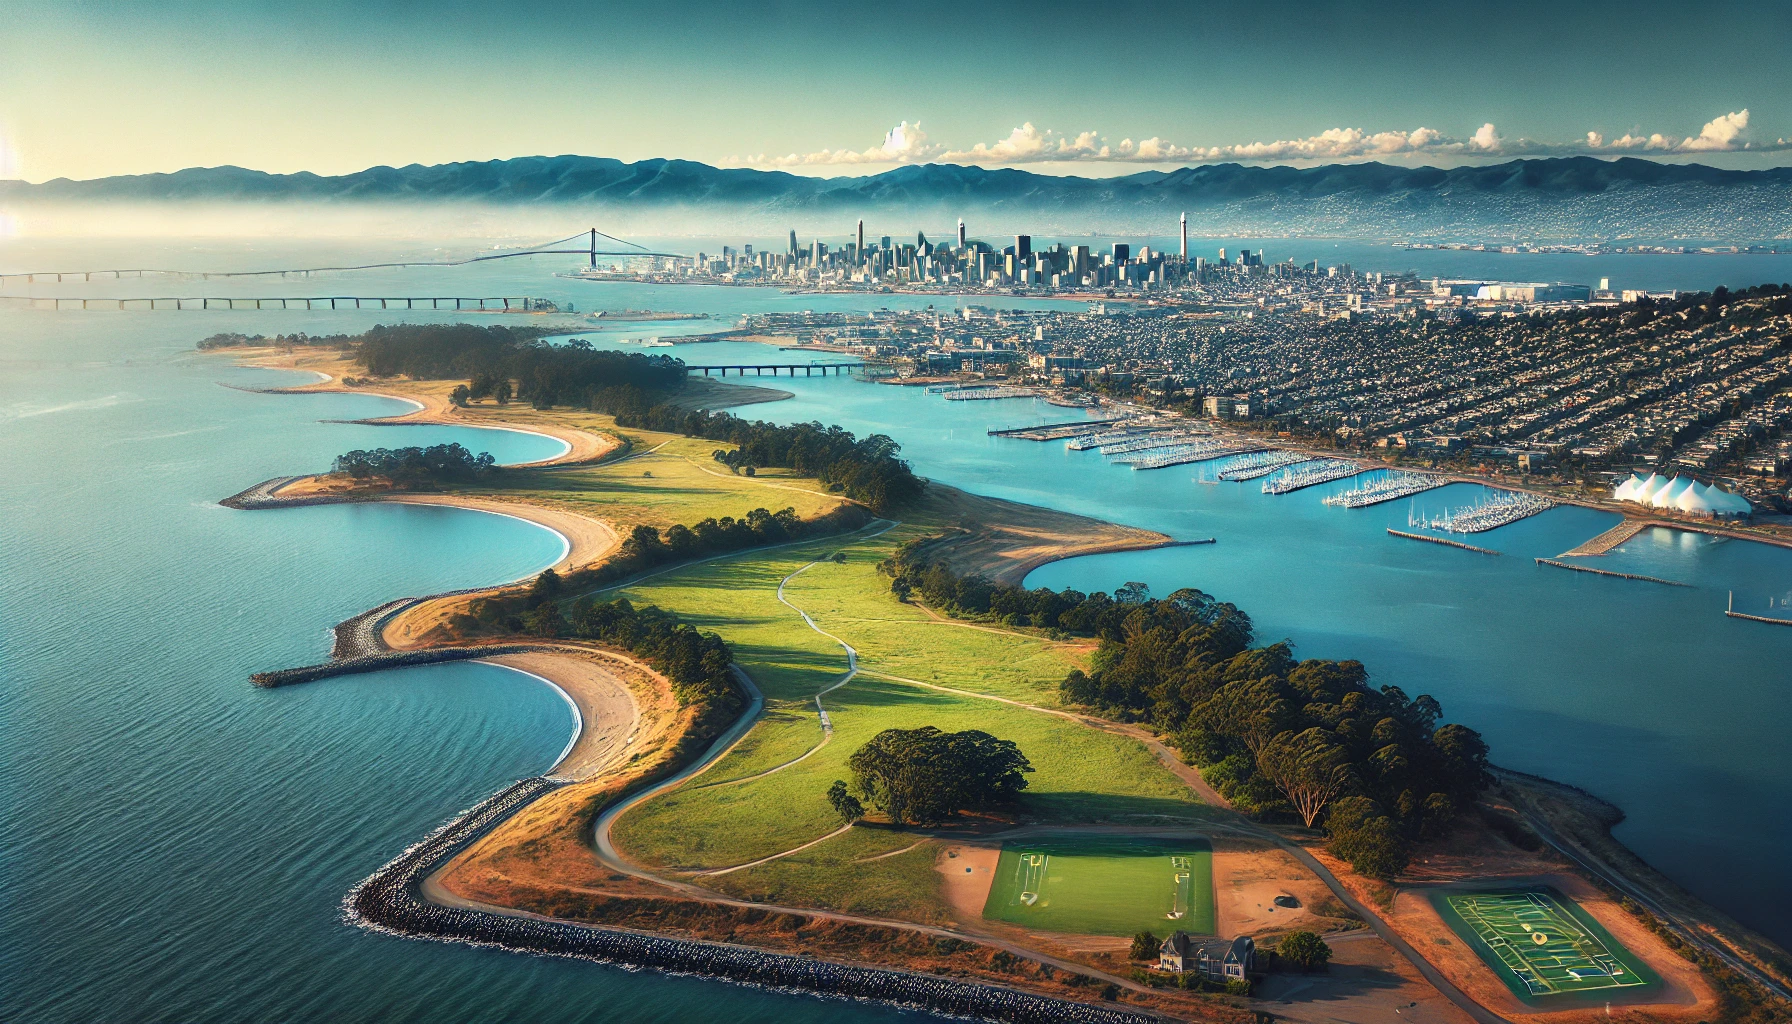 Eastshore State Park in Berkeley with lush green landscapes, walking trails, scenic waterfront views, and the distant cityscape of Berkeley under a clear blue sky.